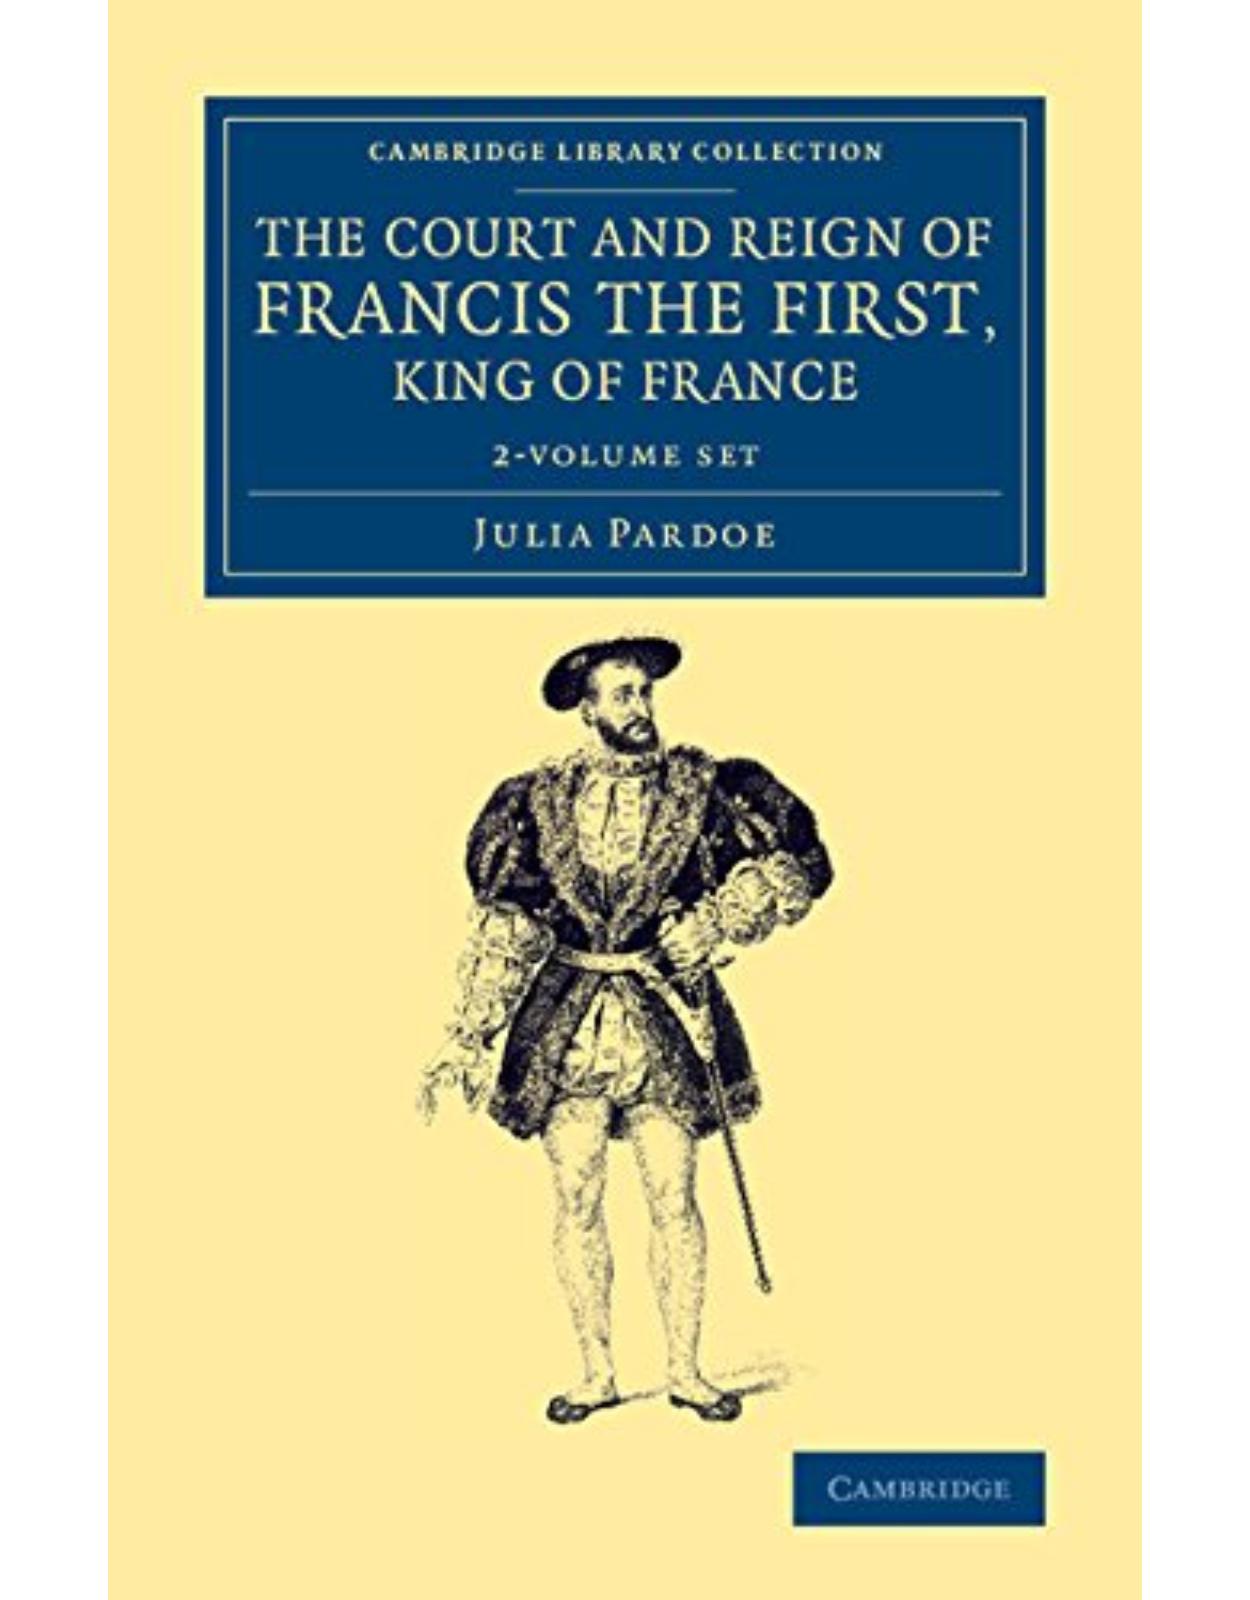 The Court and Reign of Francis the First, King of France 2 Volume Set